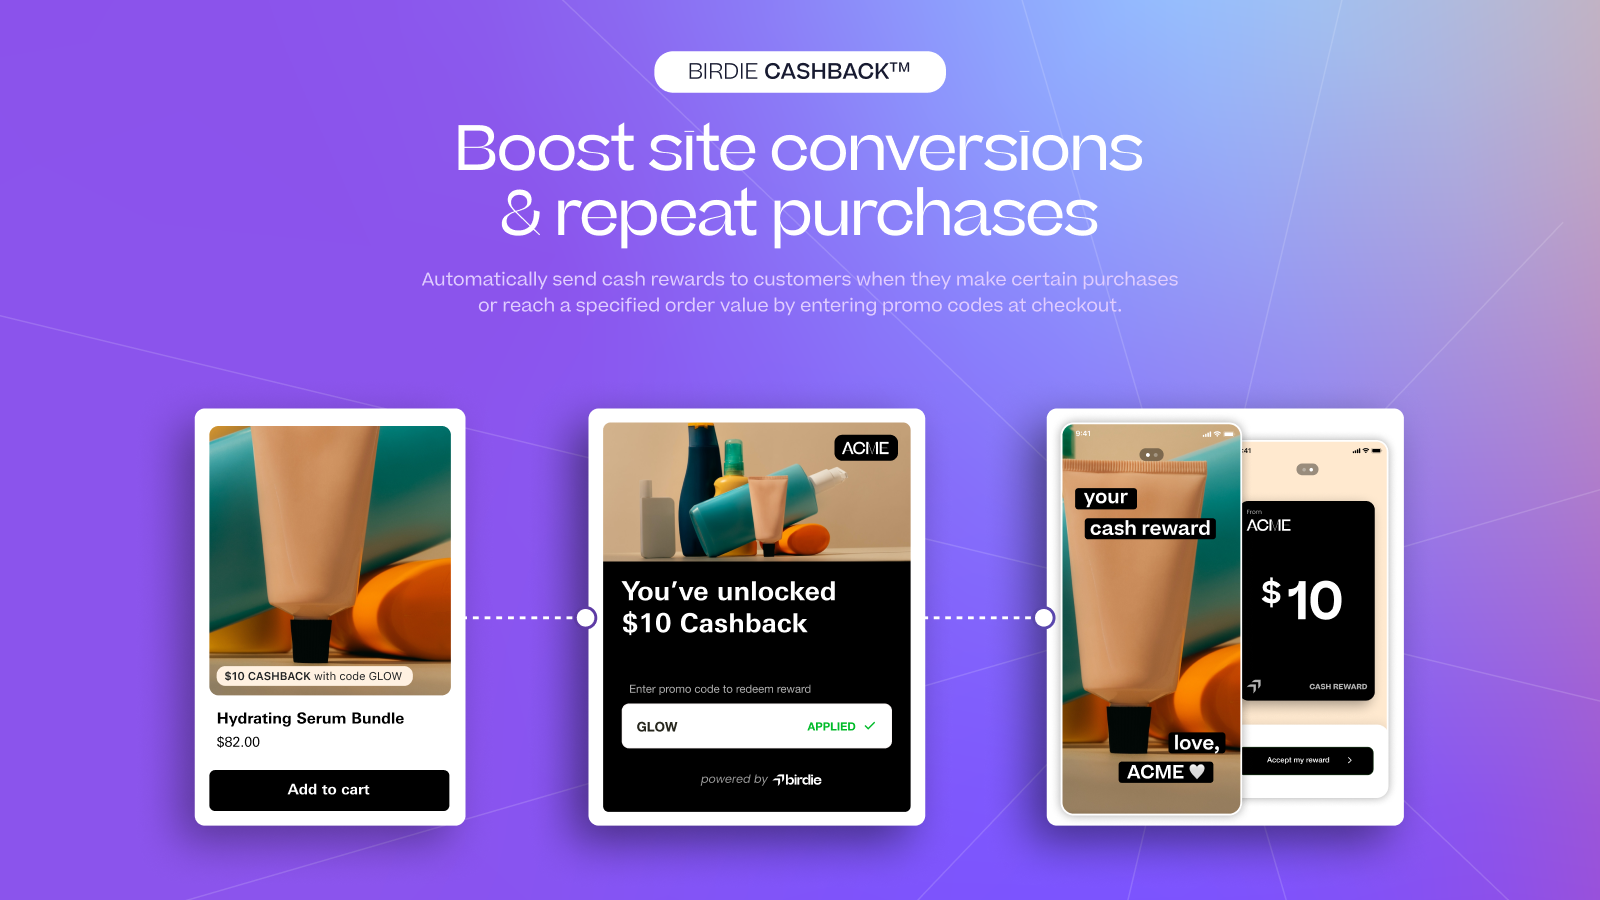 Boost site conversions & repeat purchases